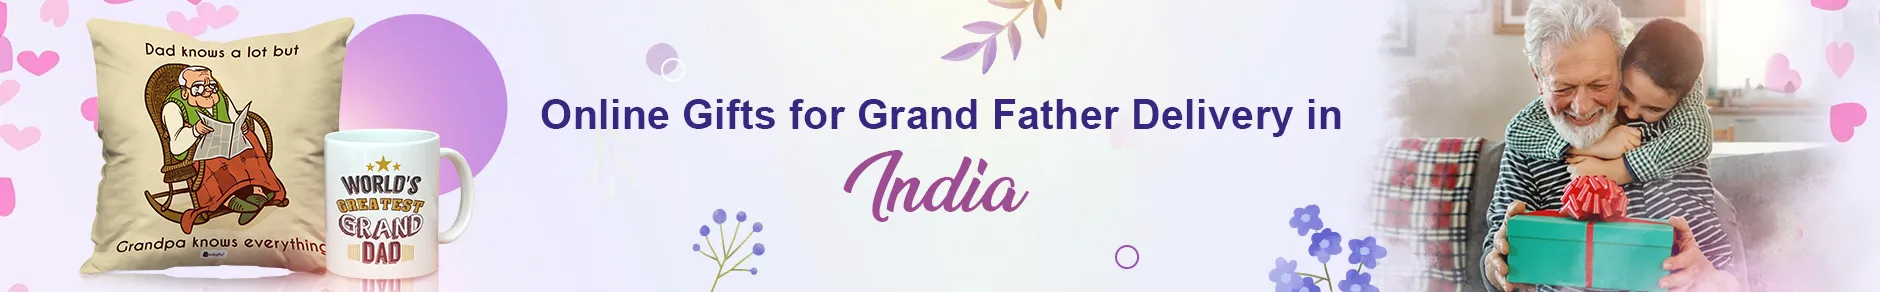 Gifts for Grand Father to India